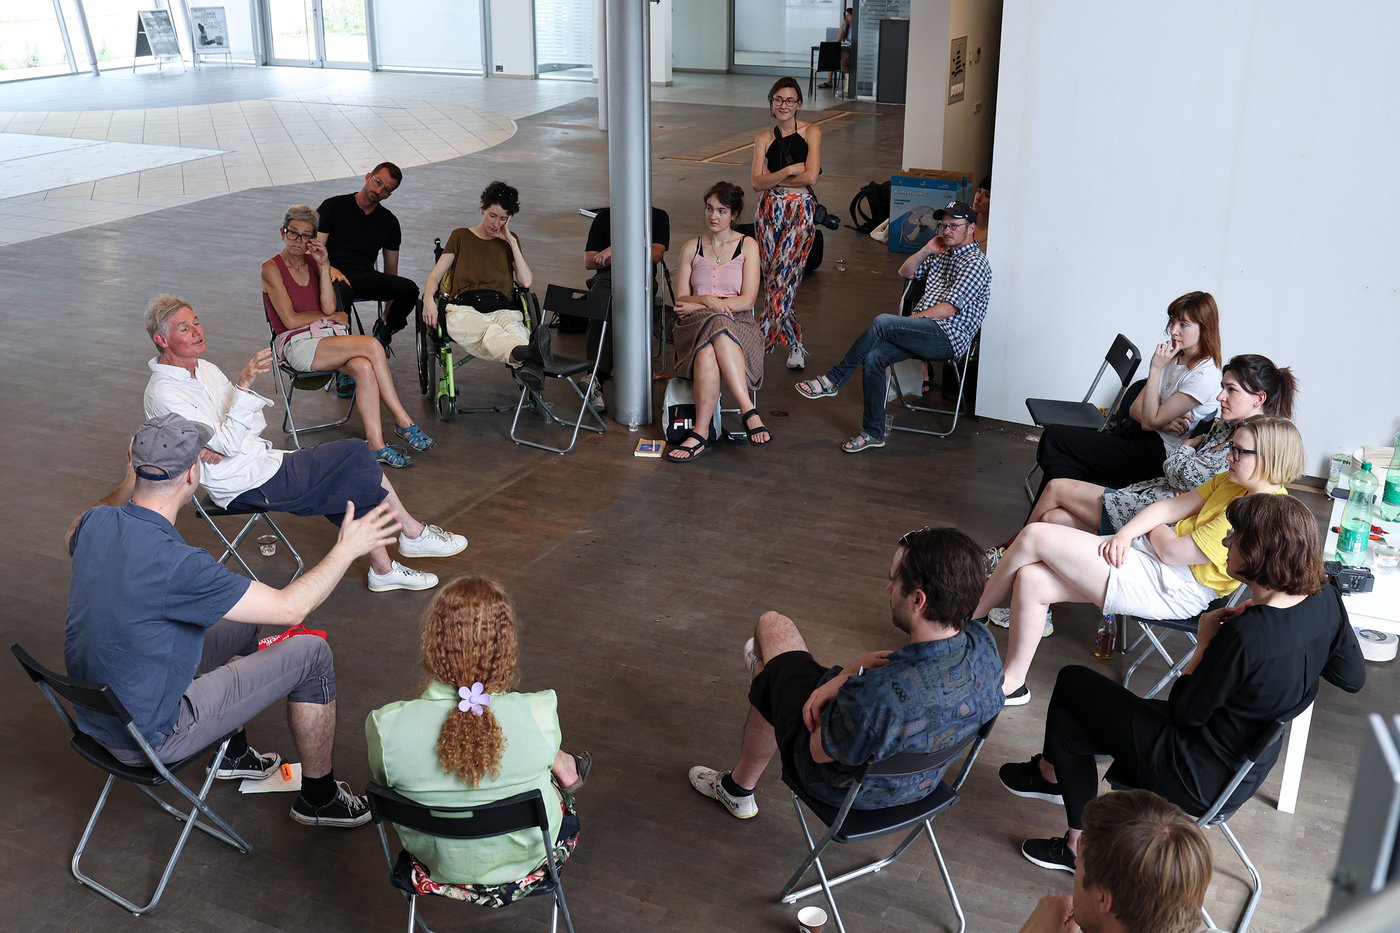 A large group of people sit on armchairs in a circle and listen, a man speaks